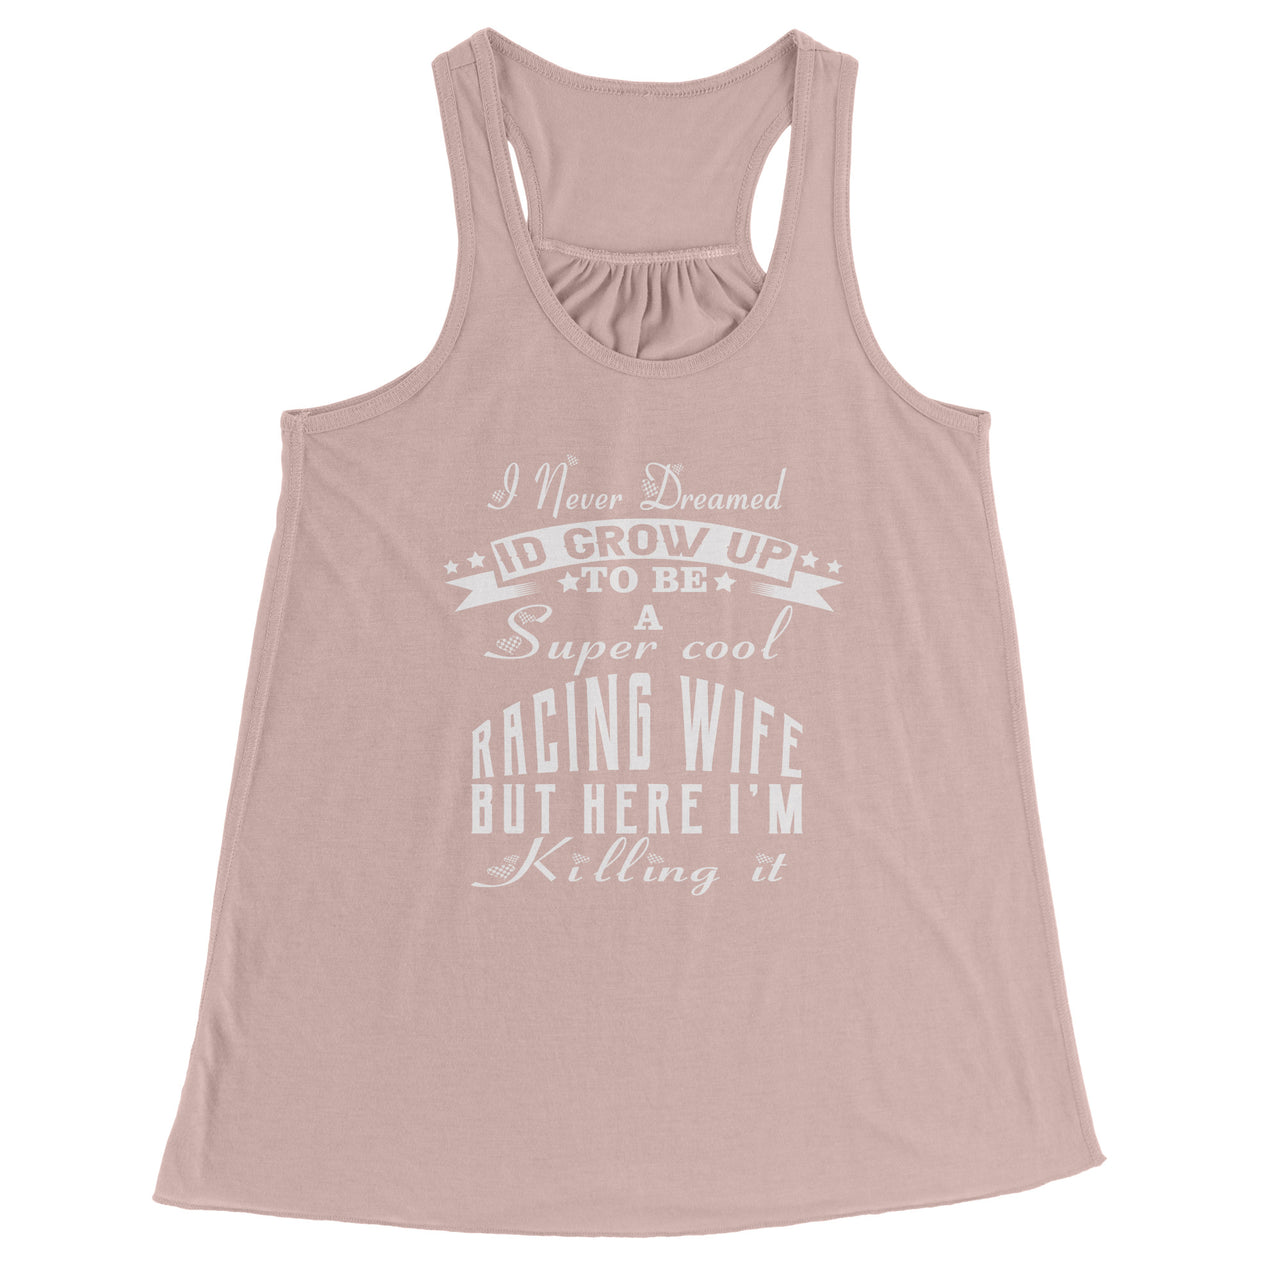 I Never Dreamed I'd Grow Up To Be A Super Cool Racing Wife But Here I'm Killing It T-Shirts